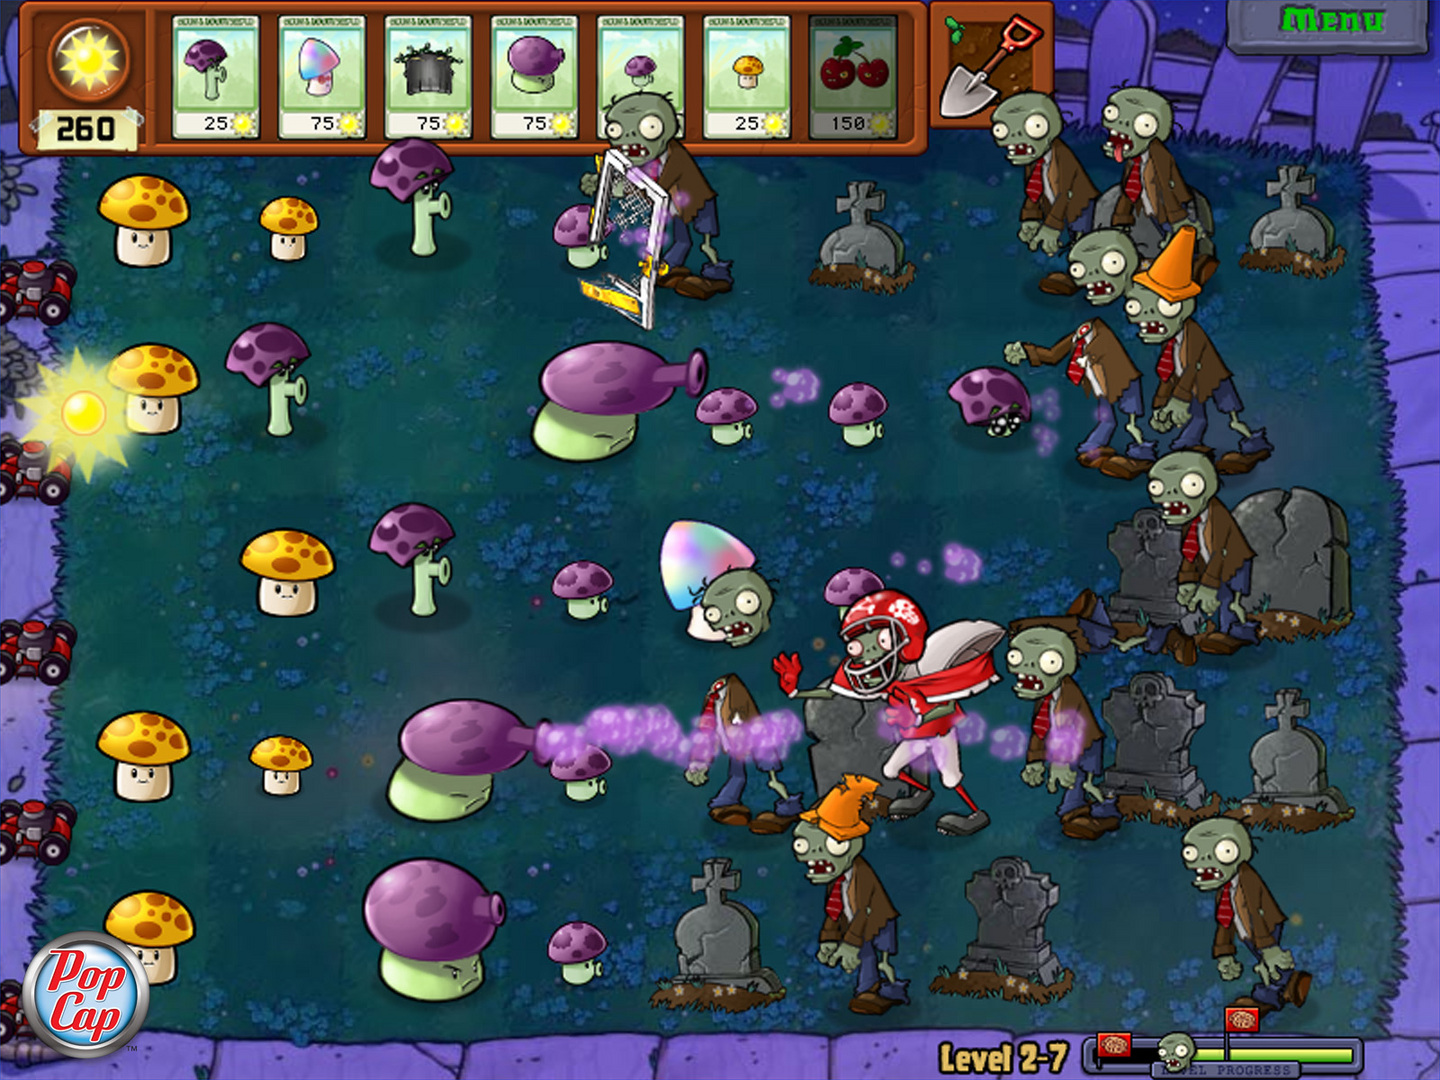 Pre-purchase Plants vs. Zombies on Steam, get a free game – Destructoid